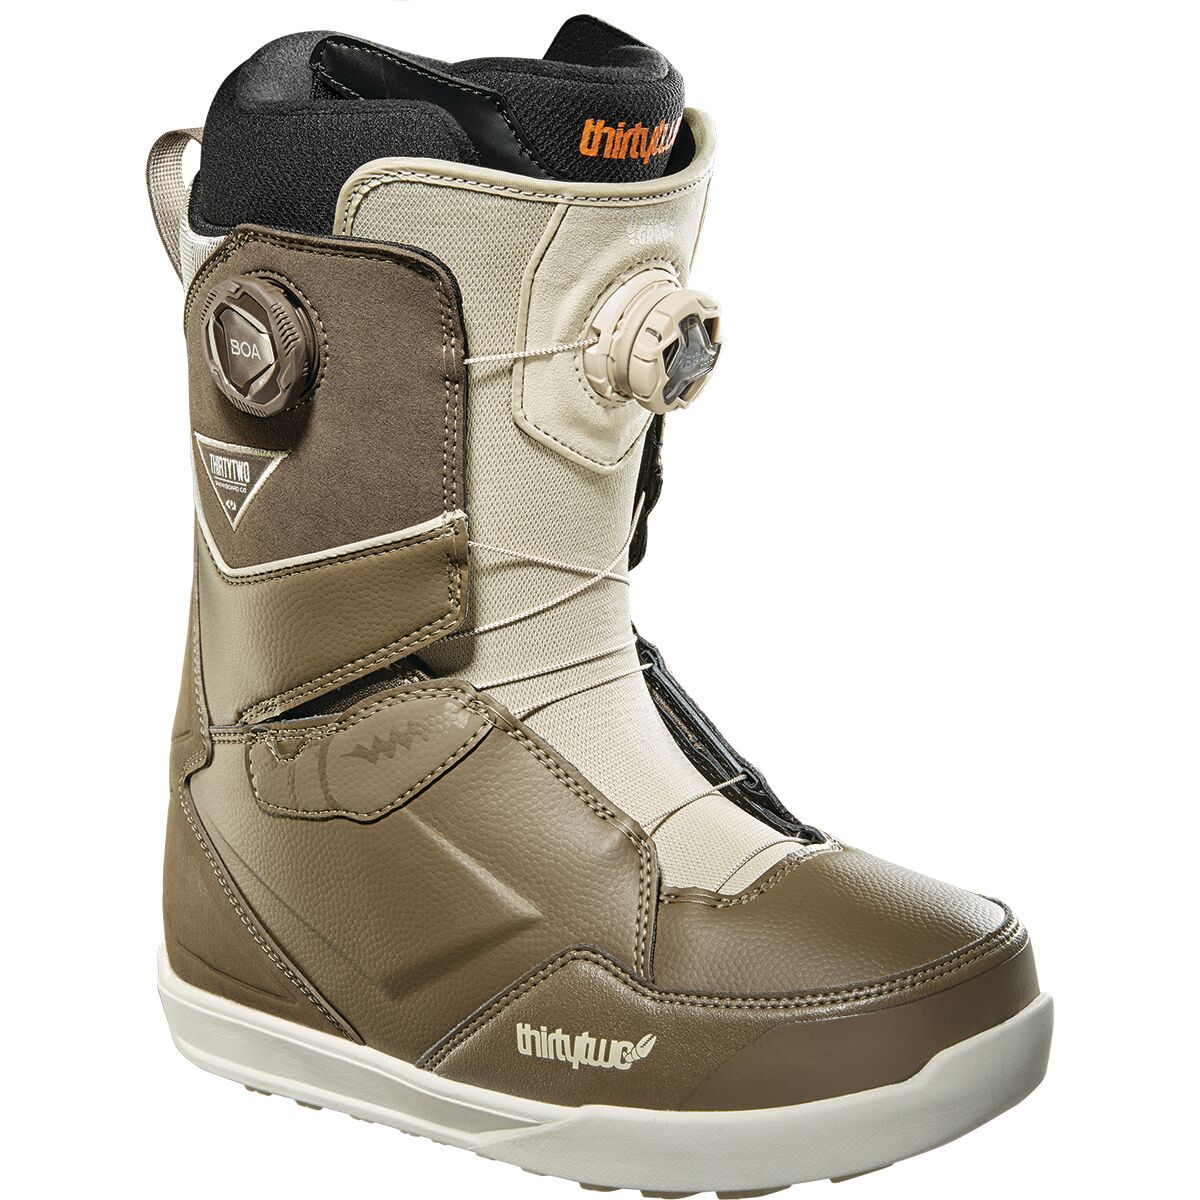 ThirtyTwo Lashed Double BOA Crab Grab Snowboard Boot - 2024 - Men's Brown/Tan